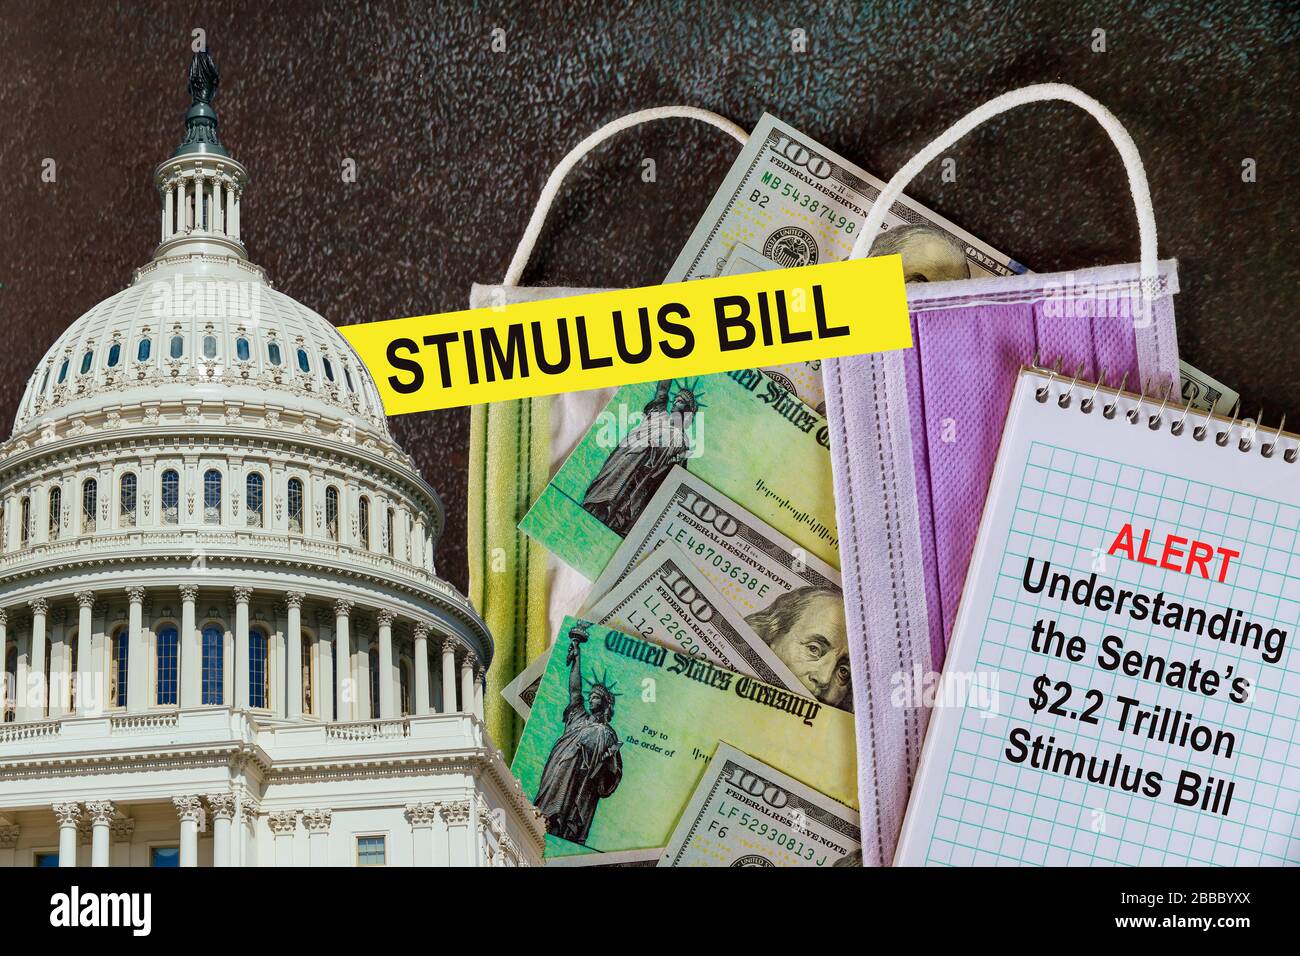 STIMULUS CHECKS Washington DC Capitol dome with Global pandemic Covid 19 lockdown Coronavirus stimulus package relief checks from government US 100 dollar bills currency Stock Photo